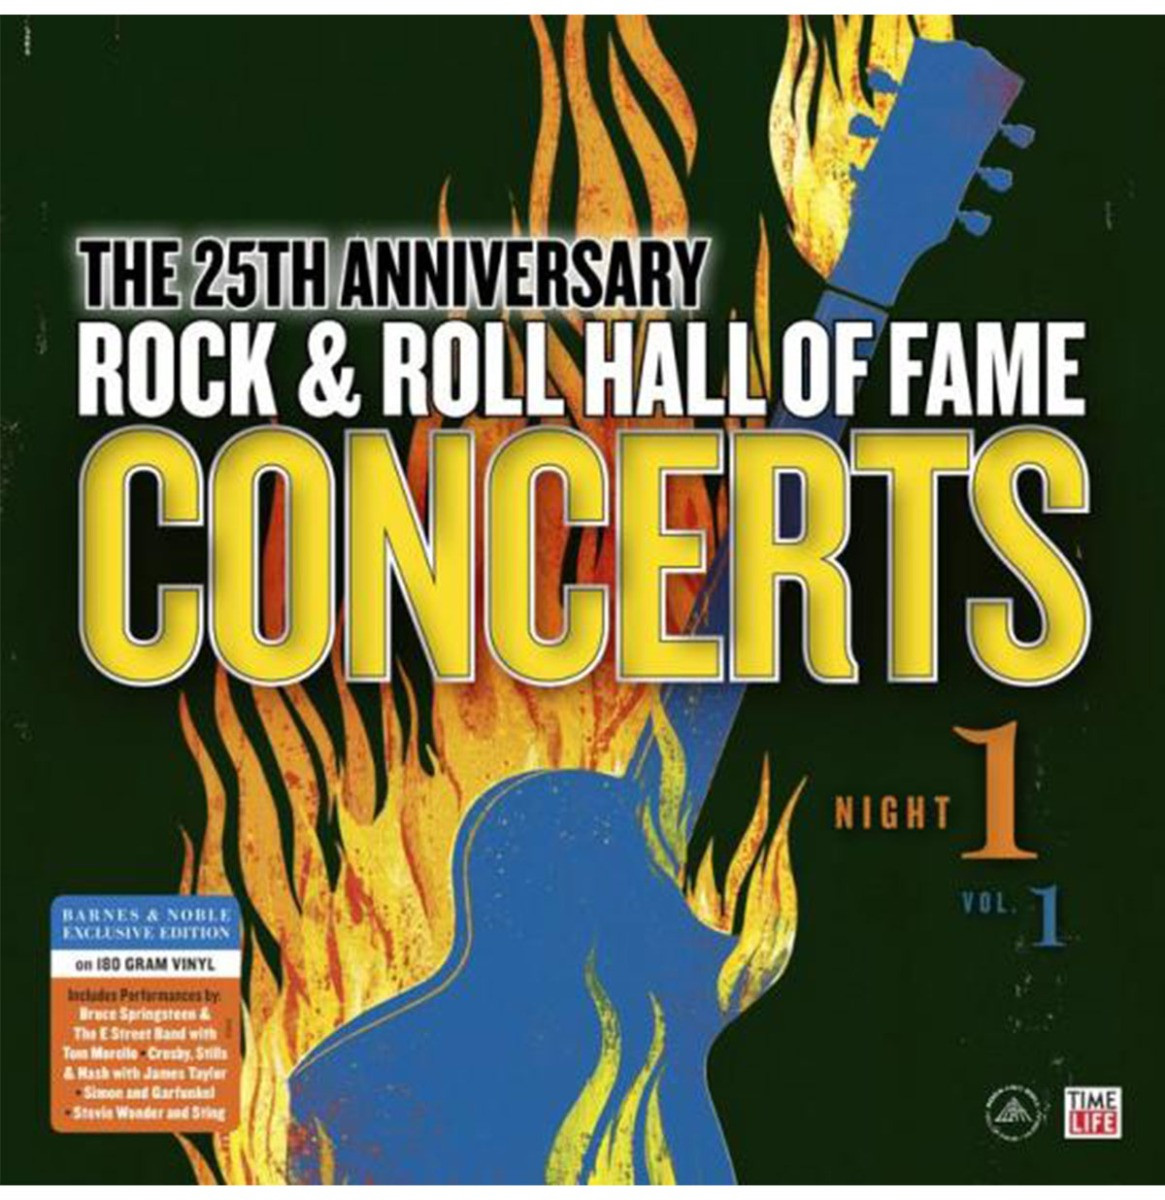 Various Artists - 25th Anniversary Rock & Roll Hall of Fame Concerts: Night 1 Vol. 1 (Barnes & Noble Exclusive) LP